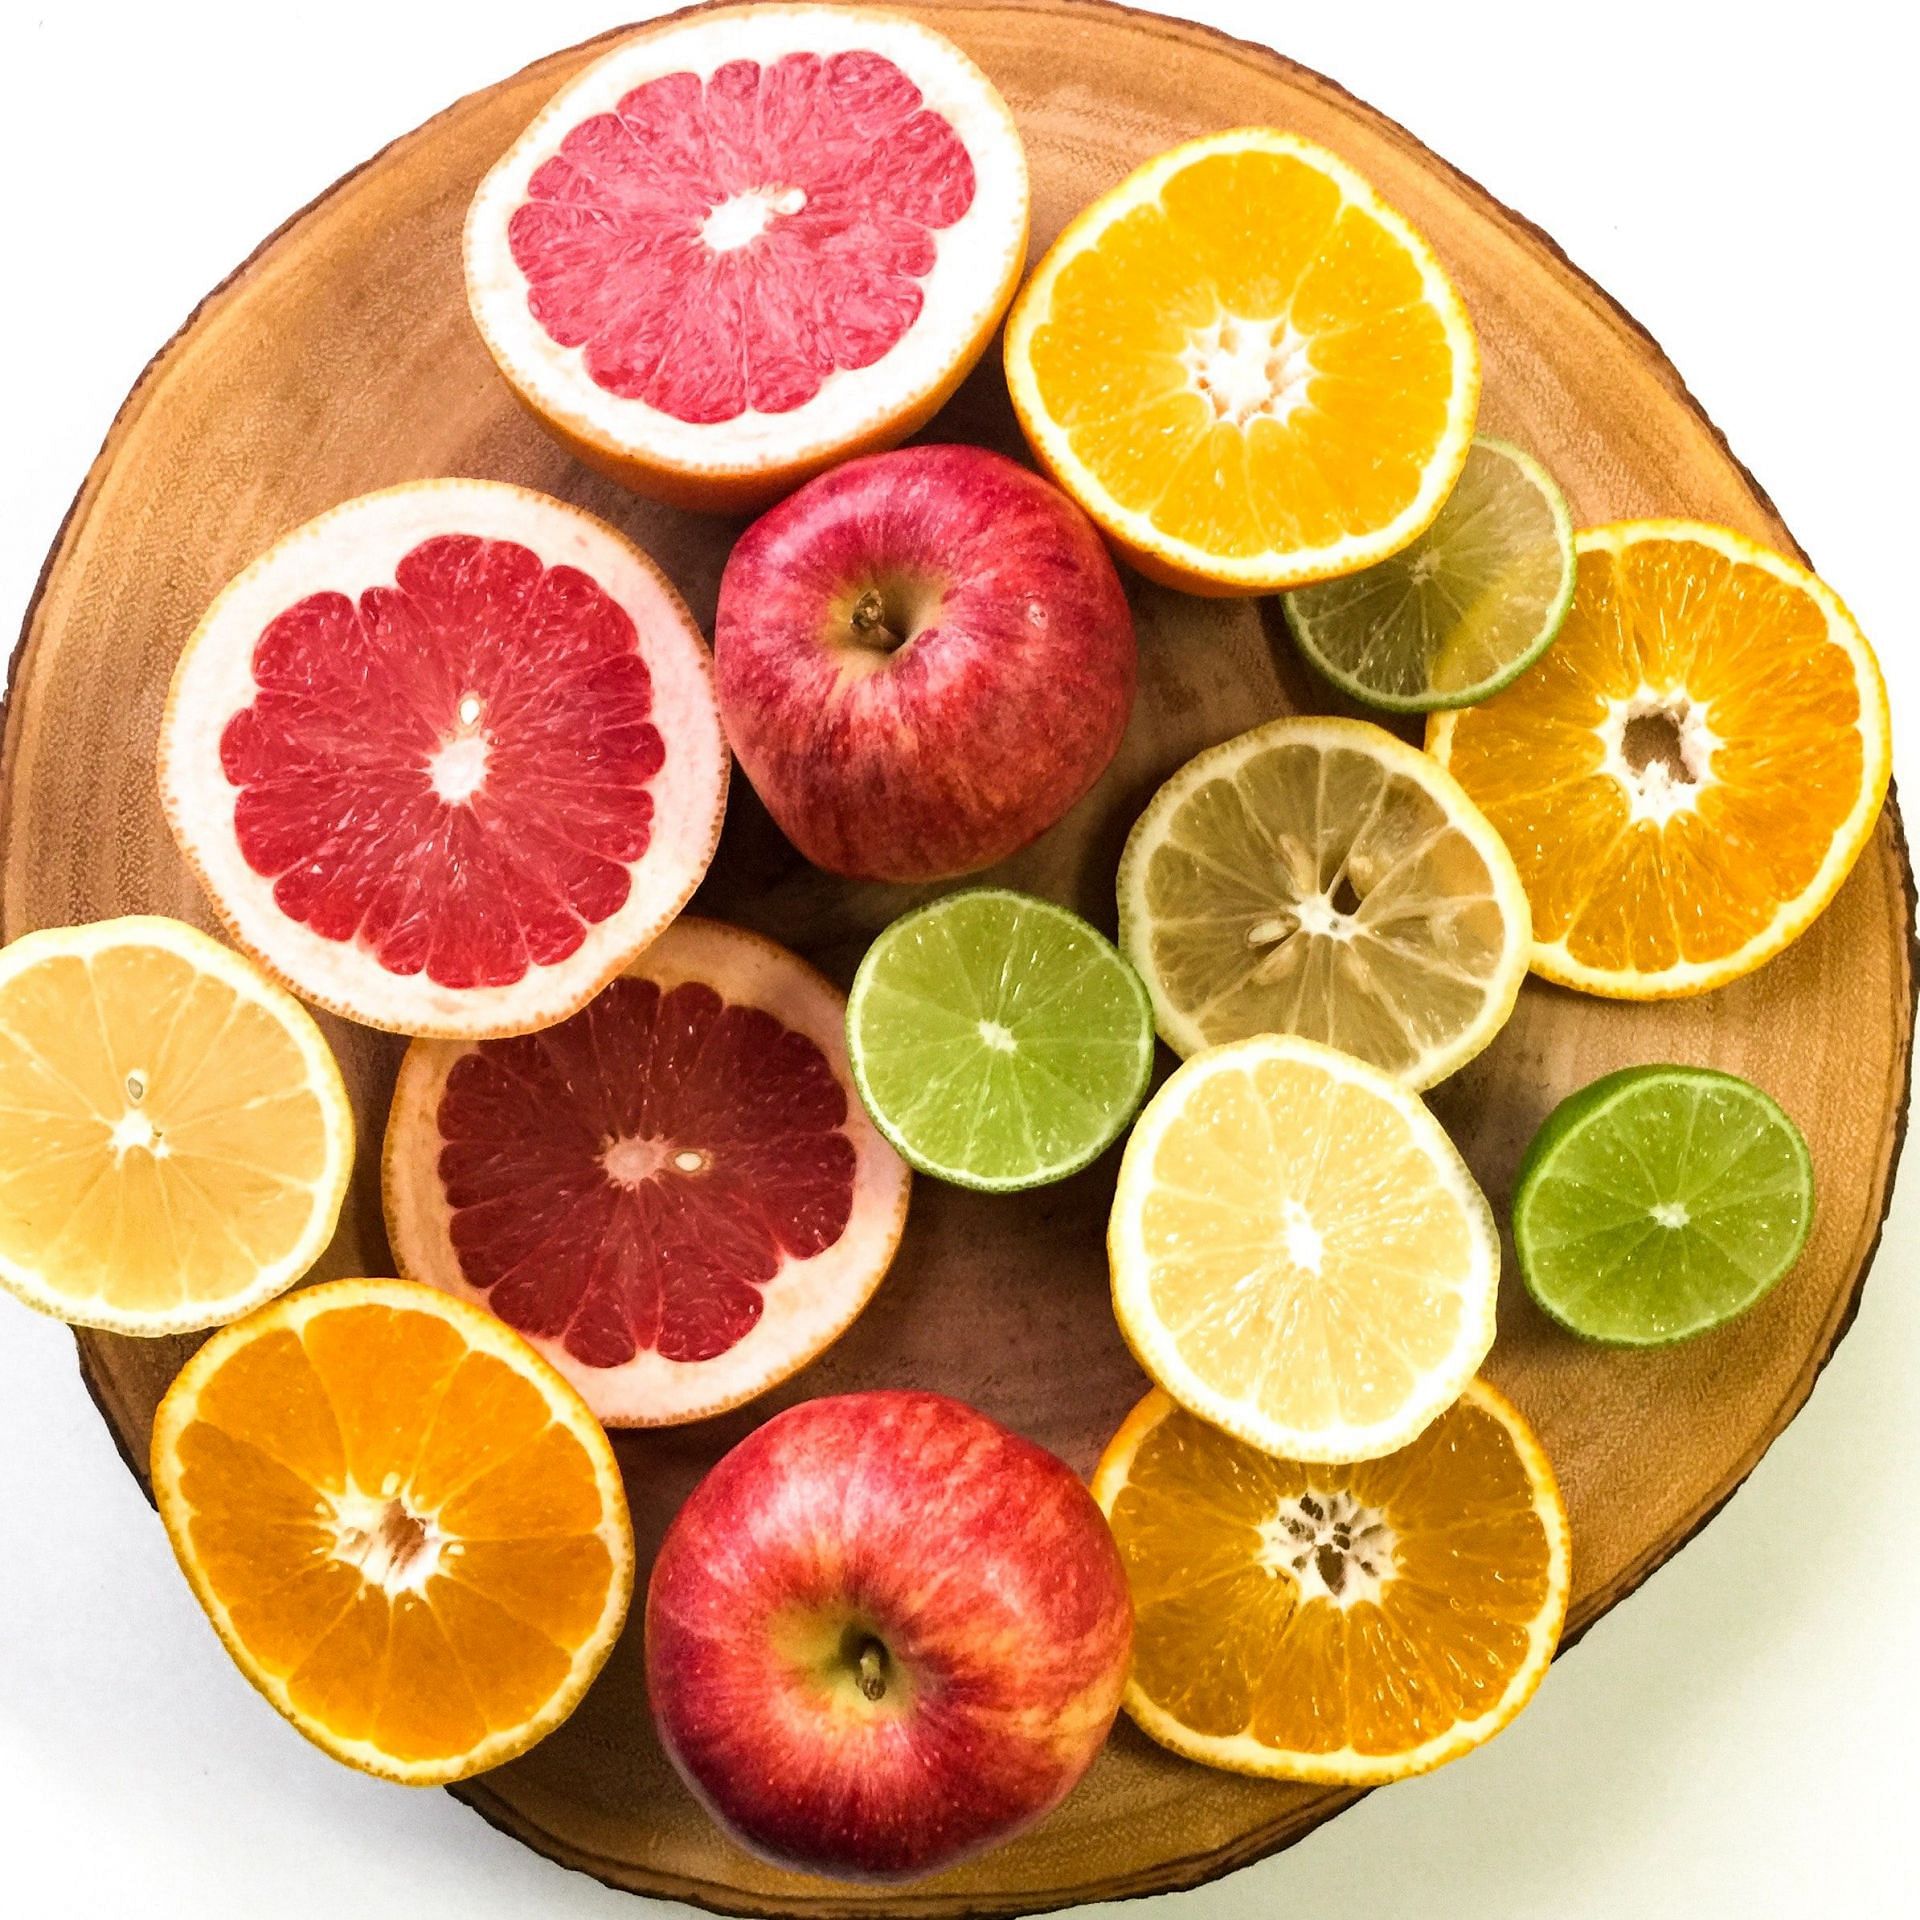 Citrus fruits are rich sources of vitamin C and beneficial  for healthy teeth and gums (Image via Pexels)